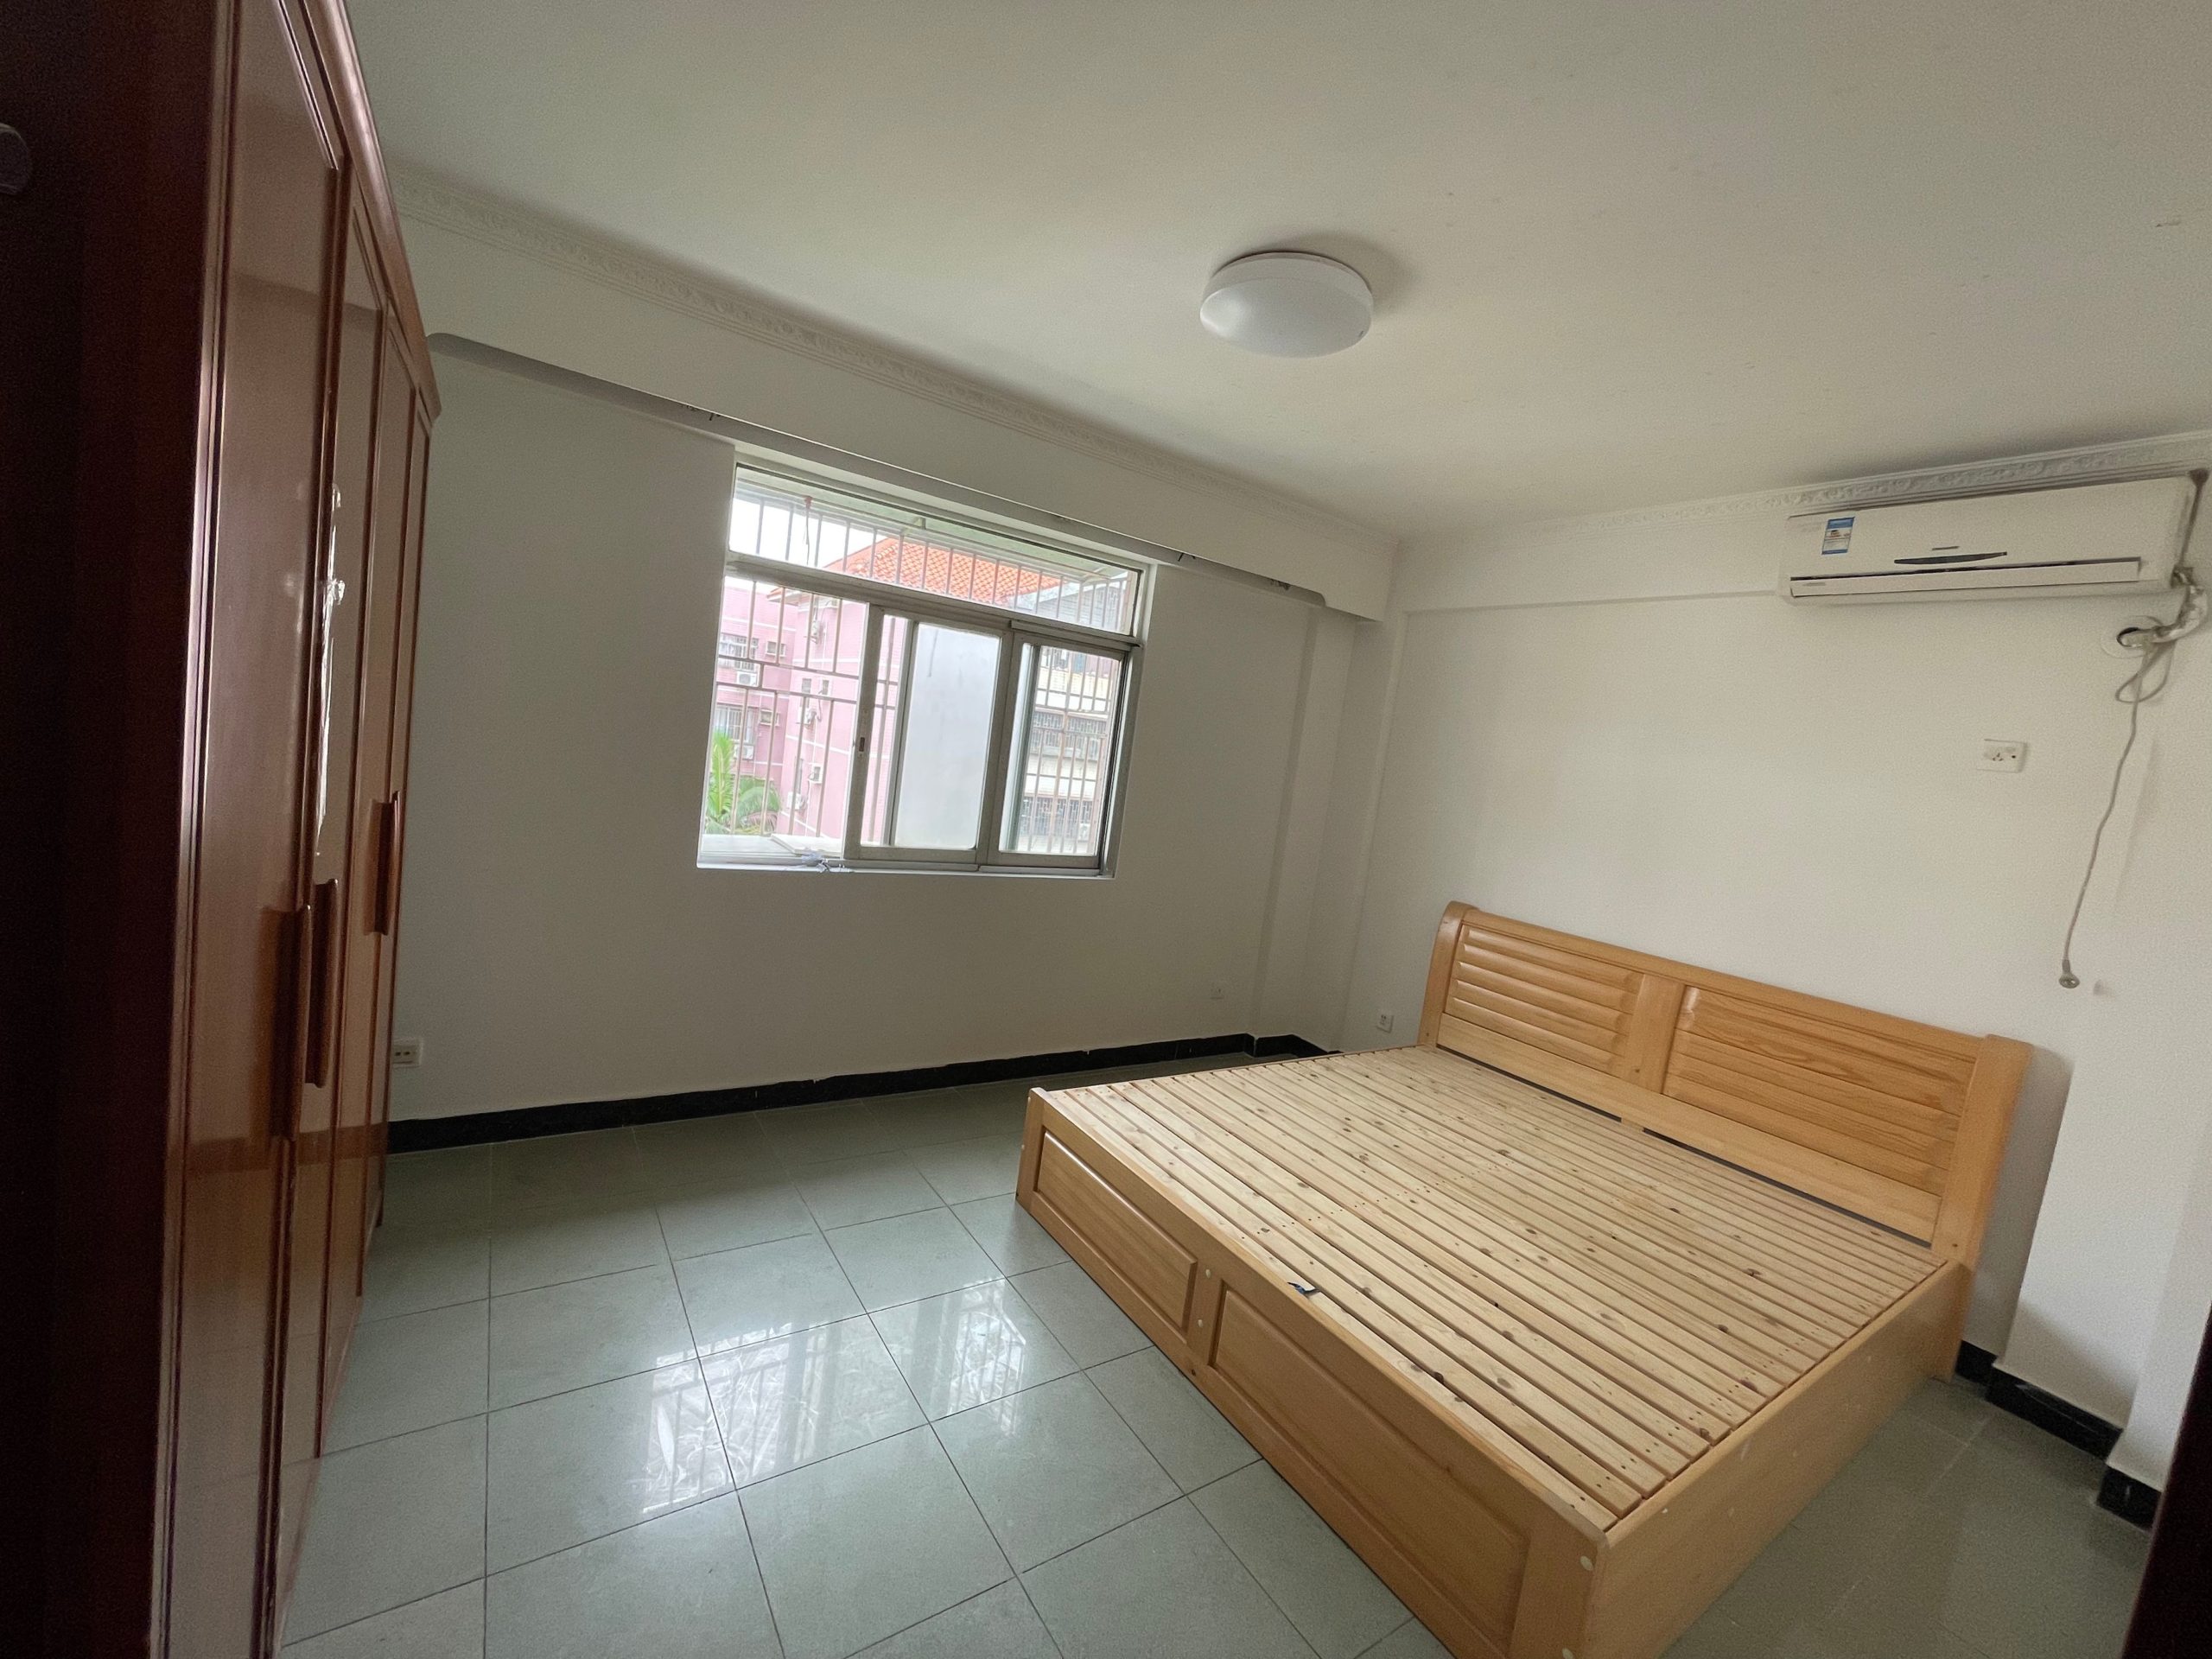 Featured image for “Big bedroom in Nanshan District for Rent from owner – shared apartment with a girl”